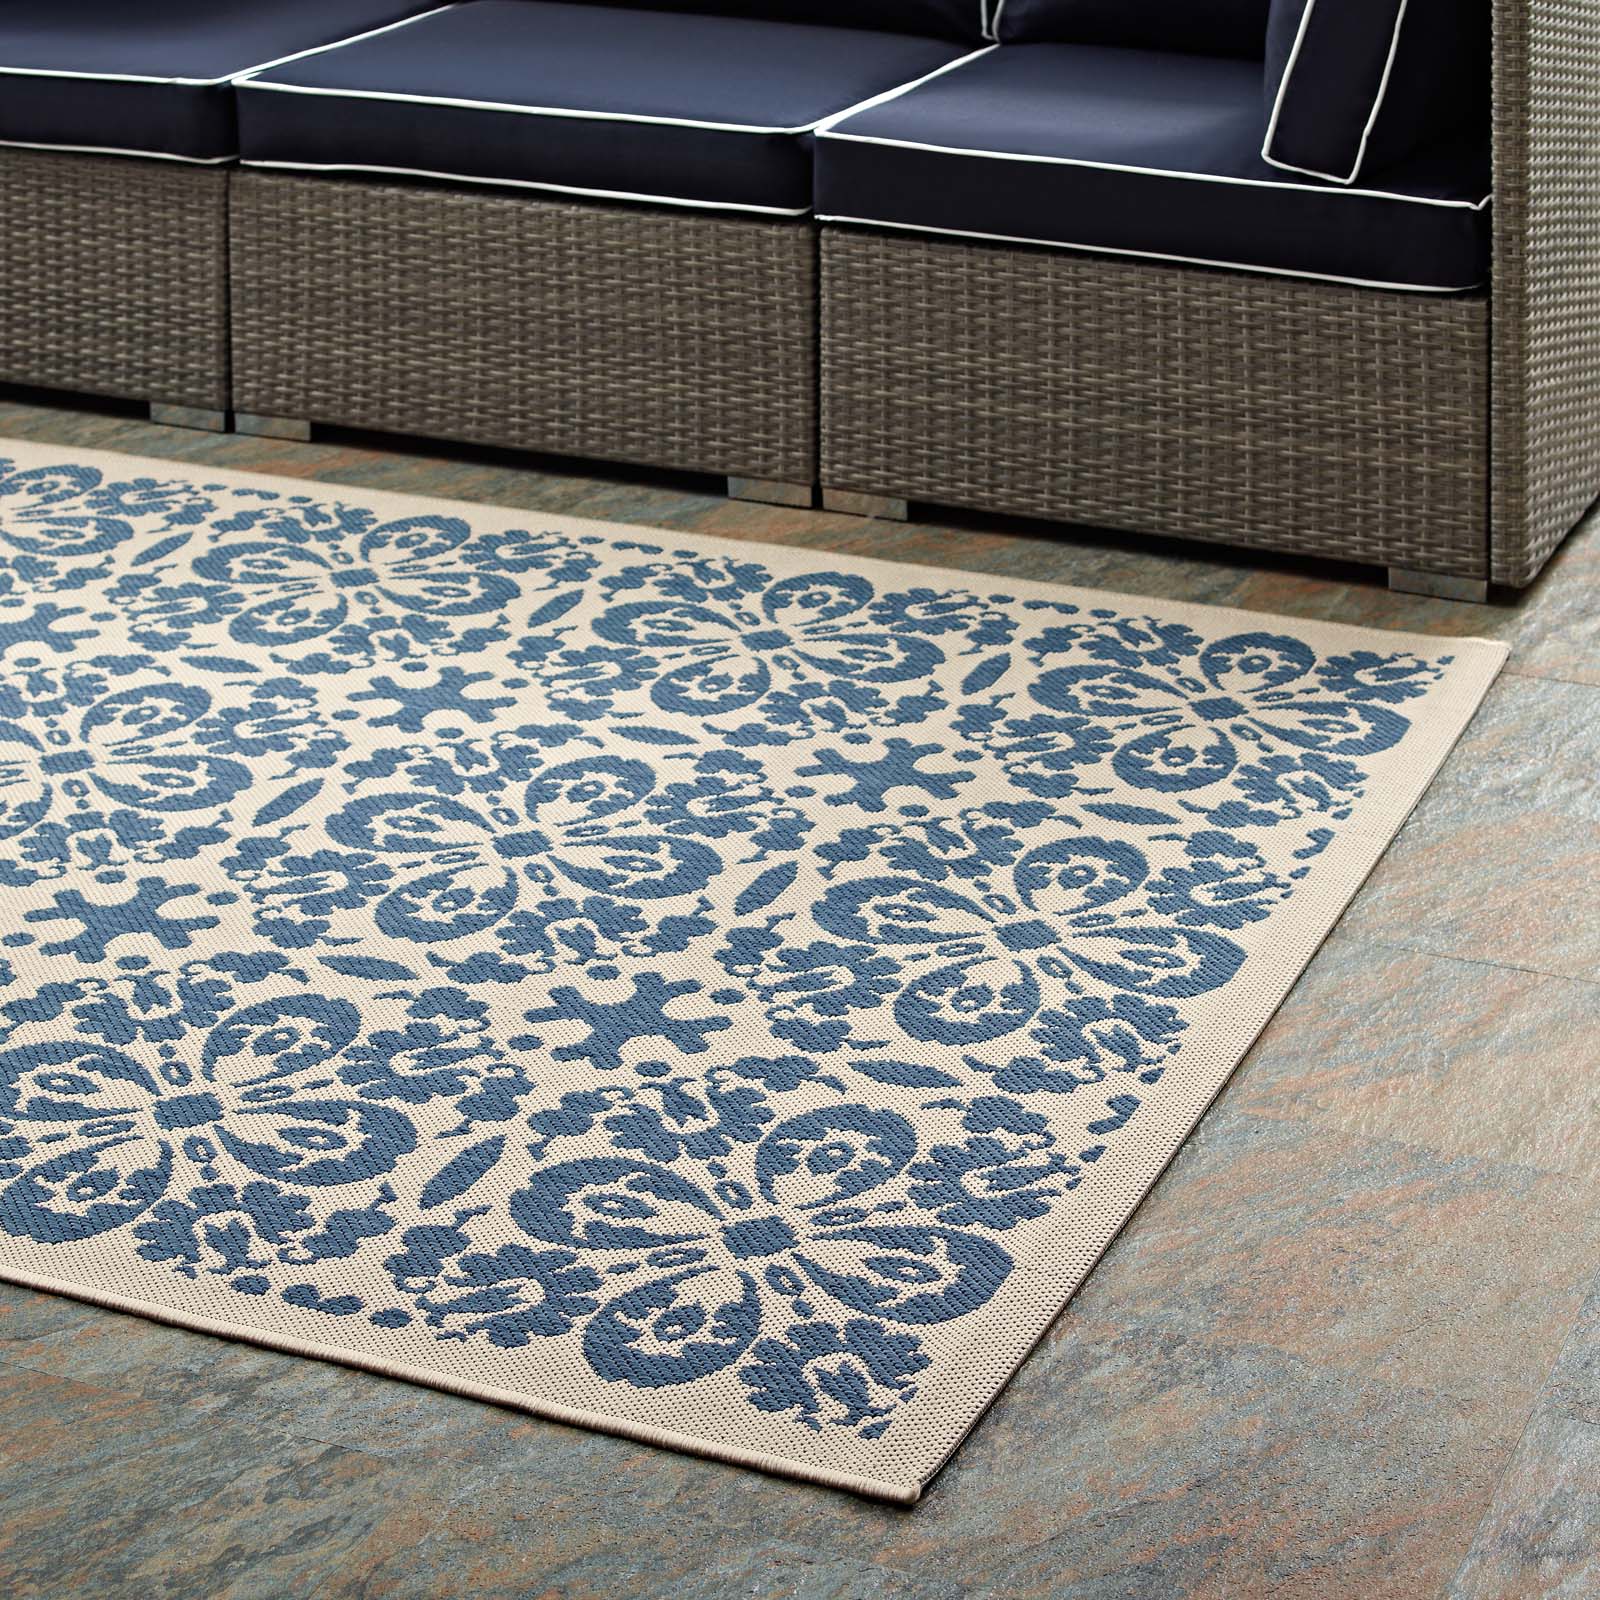 Modway Outdoor Rugs - Ariana Vintage Floral Trellis 5x8 Indoor and Outdoor Area Rug Blue & Beige